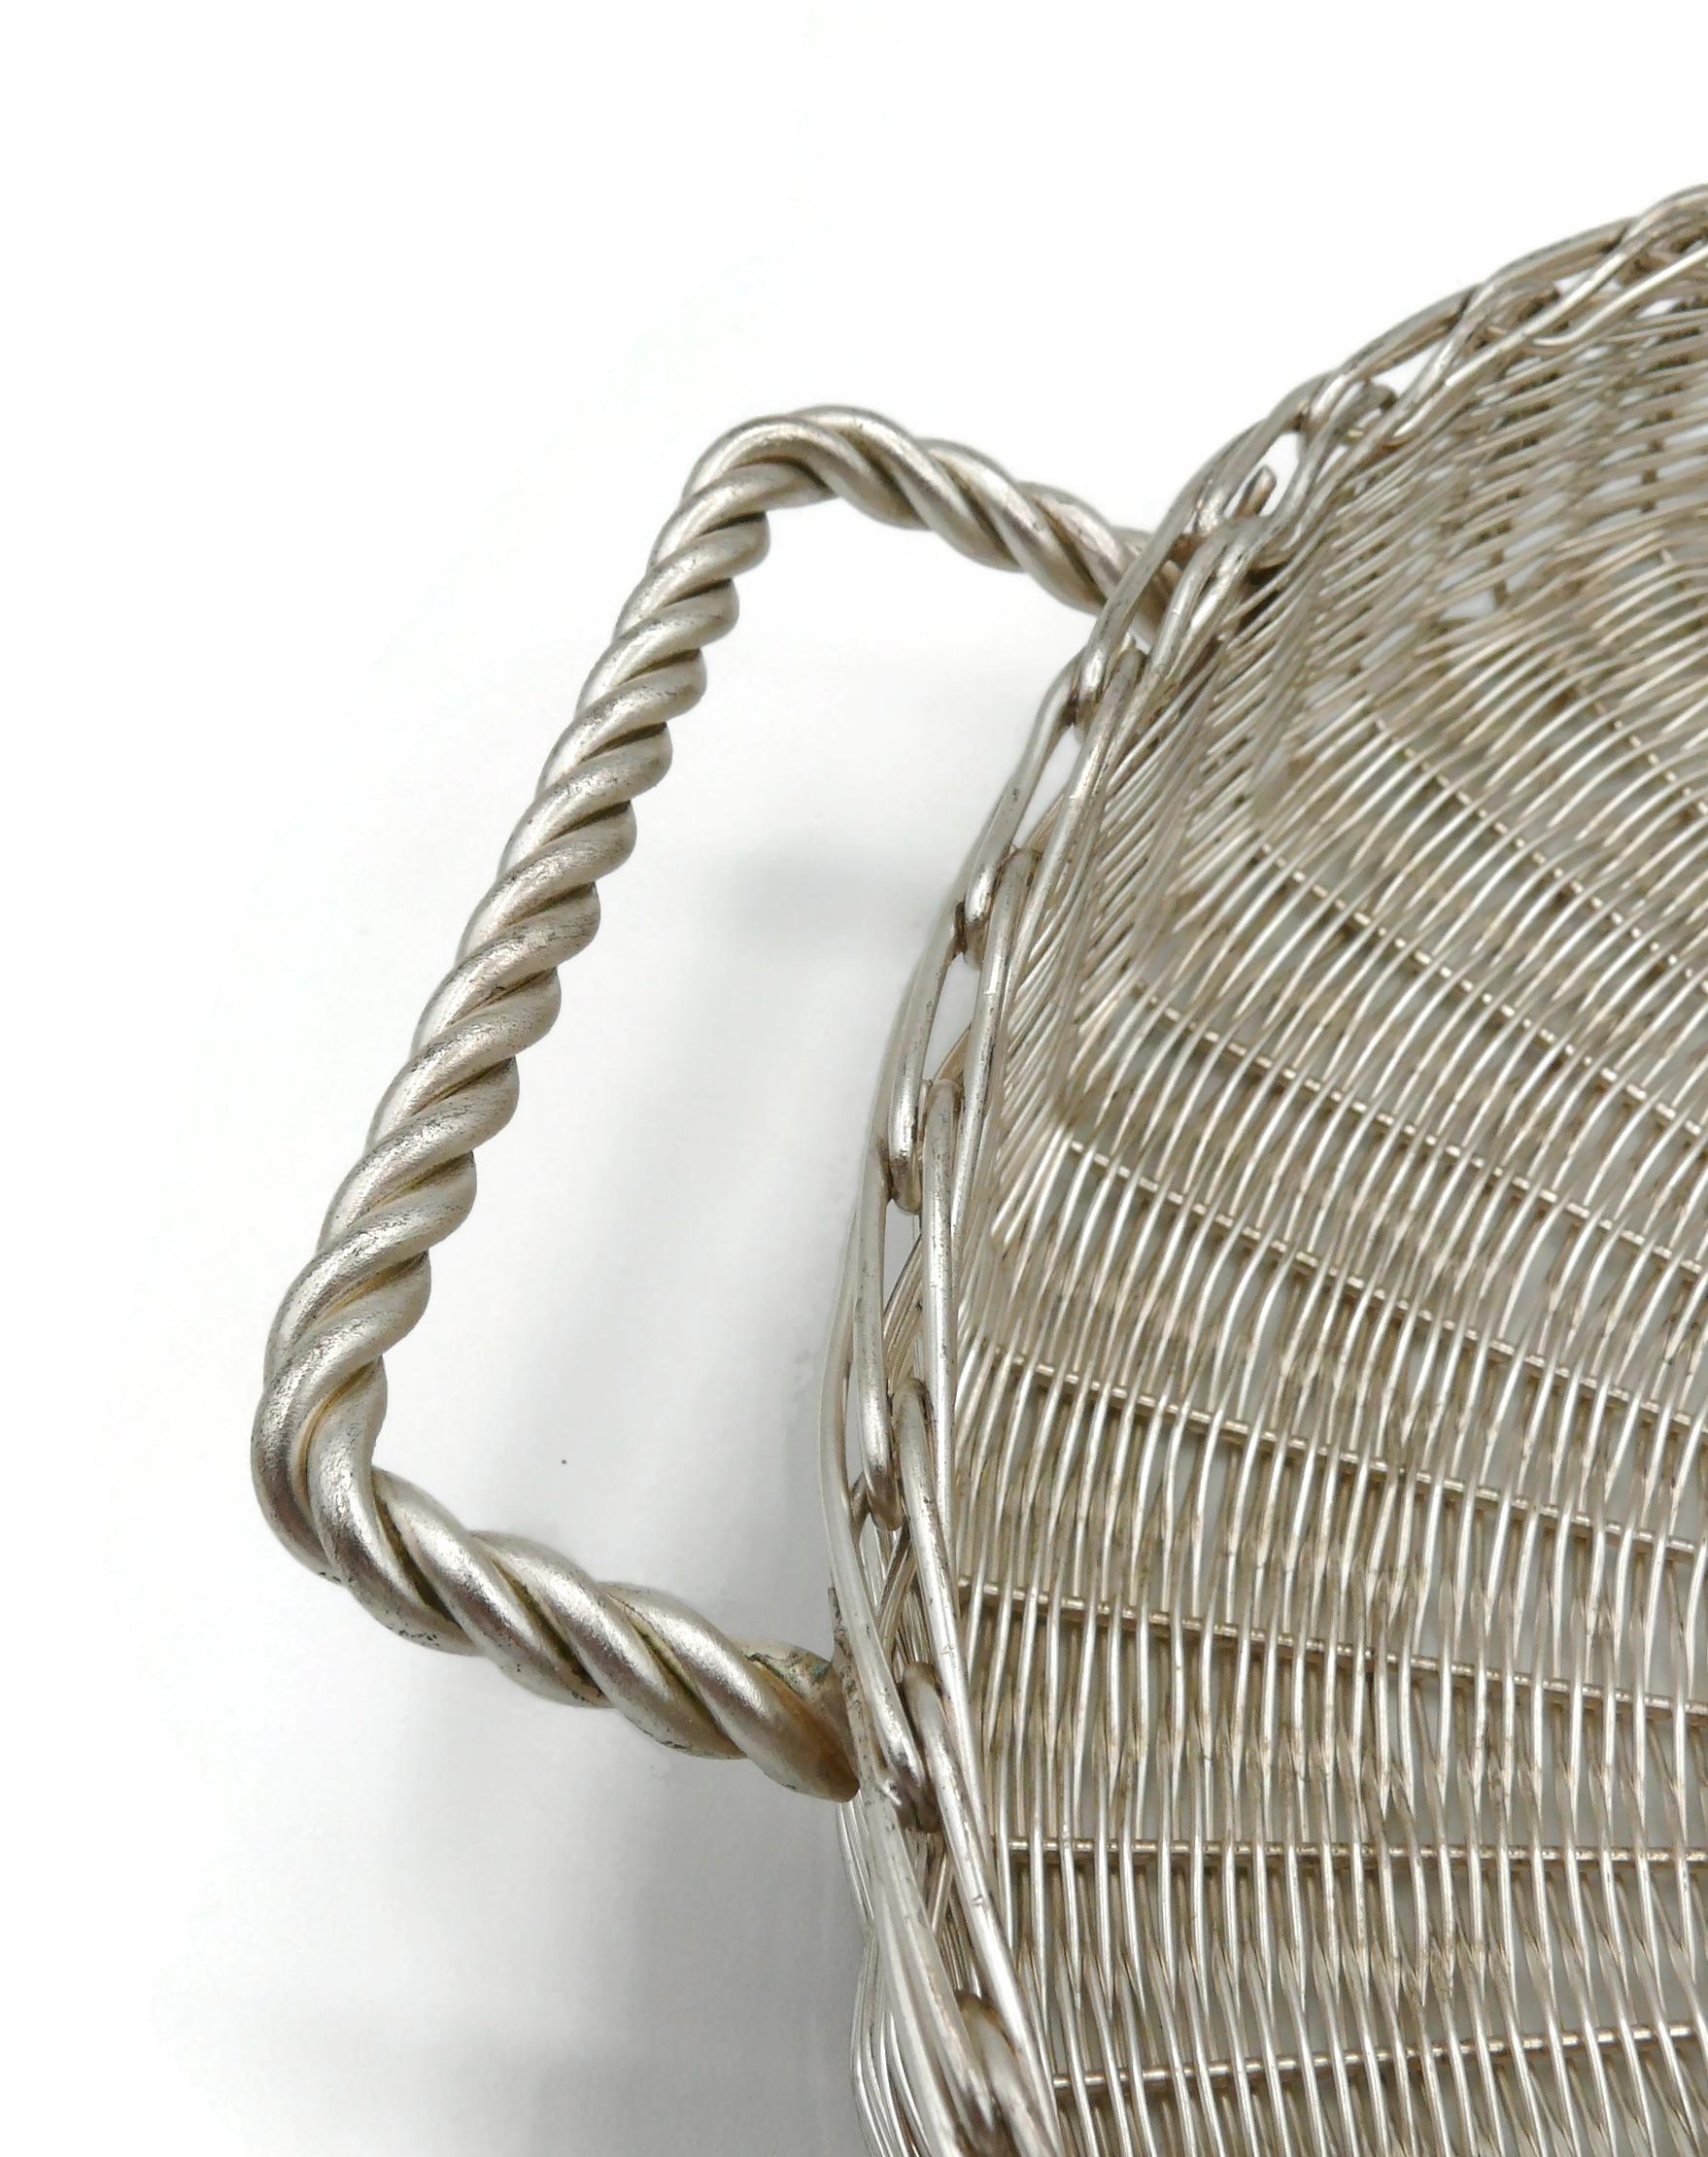 CHRISTIAN DIOR Home Collection Vintage Silver Plated Wicker Style Basket 4